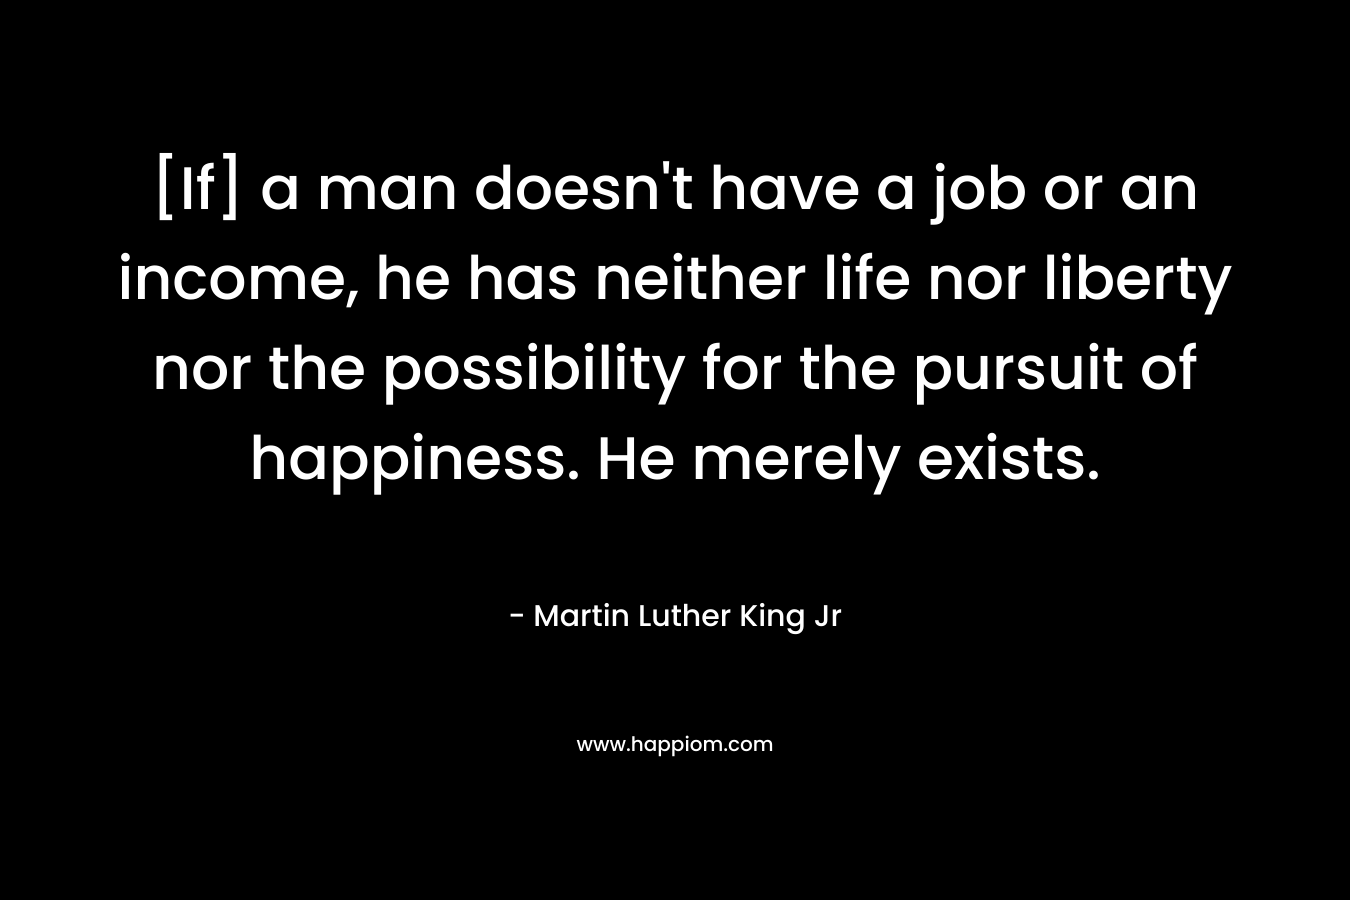 [If] a man doesn't have a job or an income, he has neither life nor liberty nor the possibility for the pursuit of happiness. He merely exists.